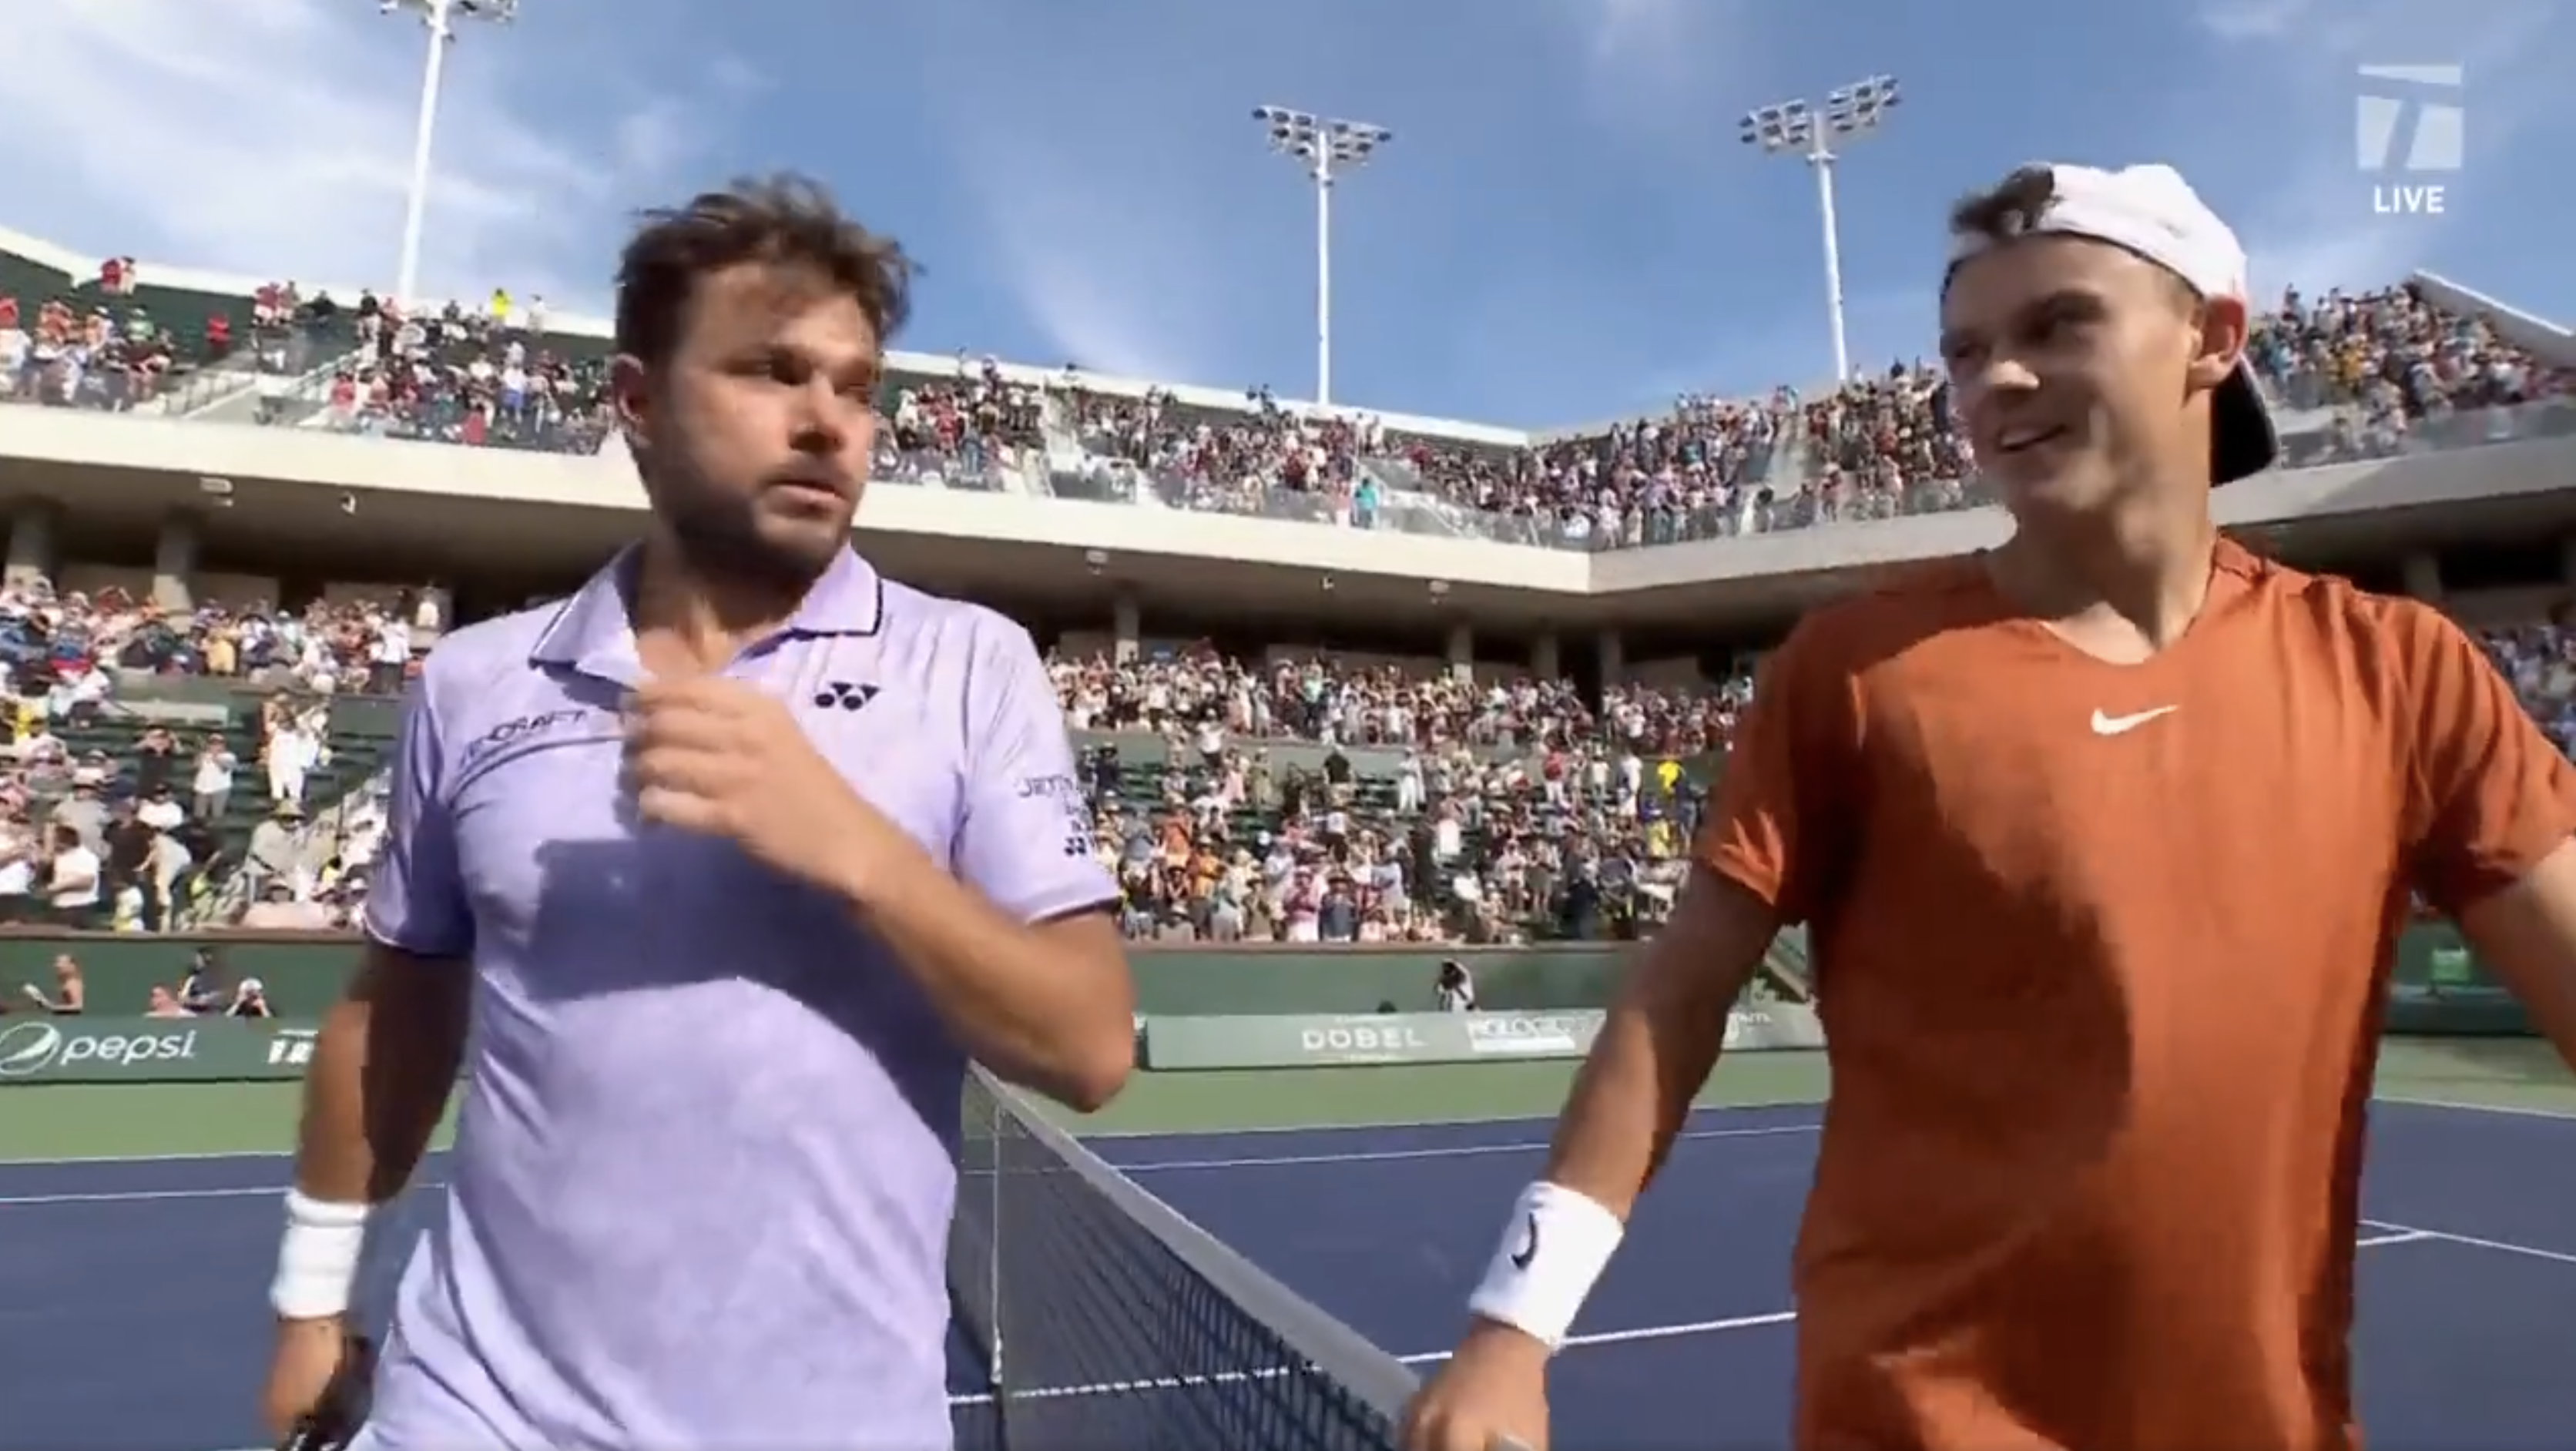 Youve got nothing to say now?” Holger Rune and Stan Wawrinka have another frosty post-match exchange